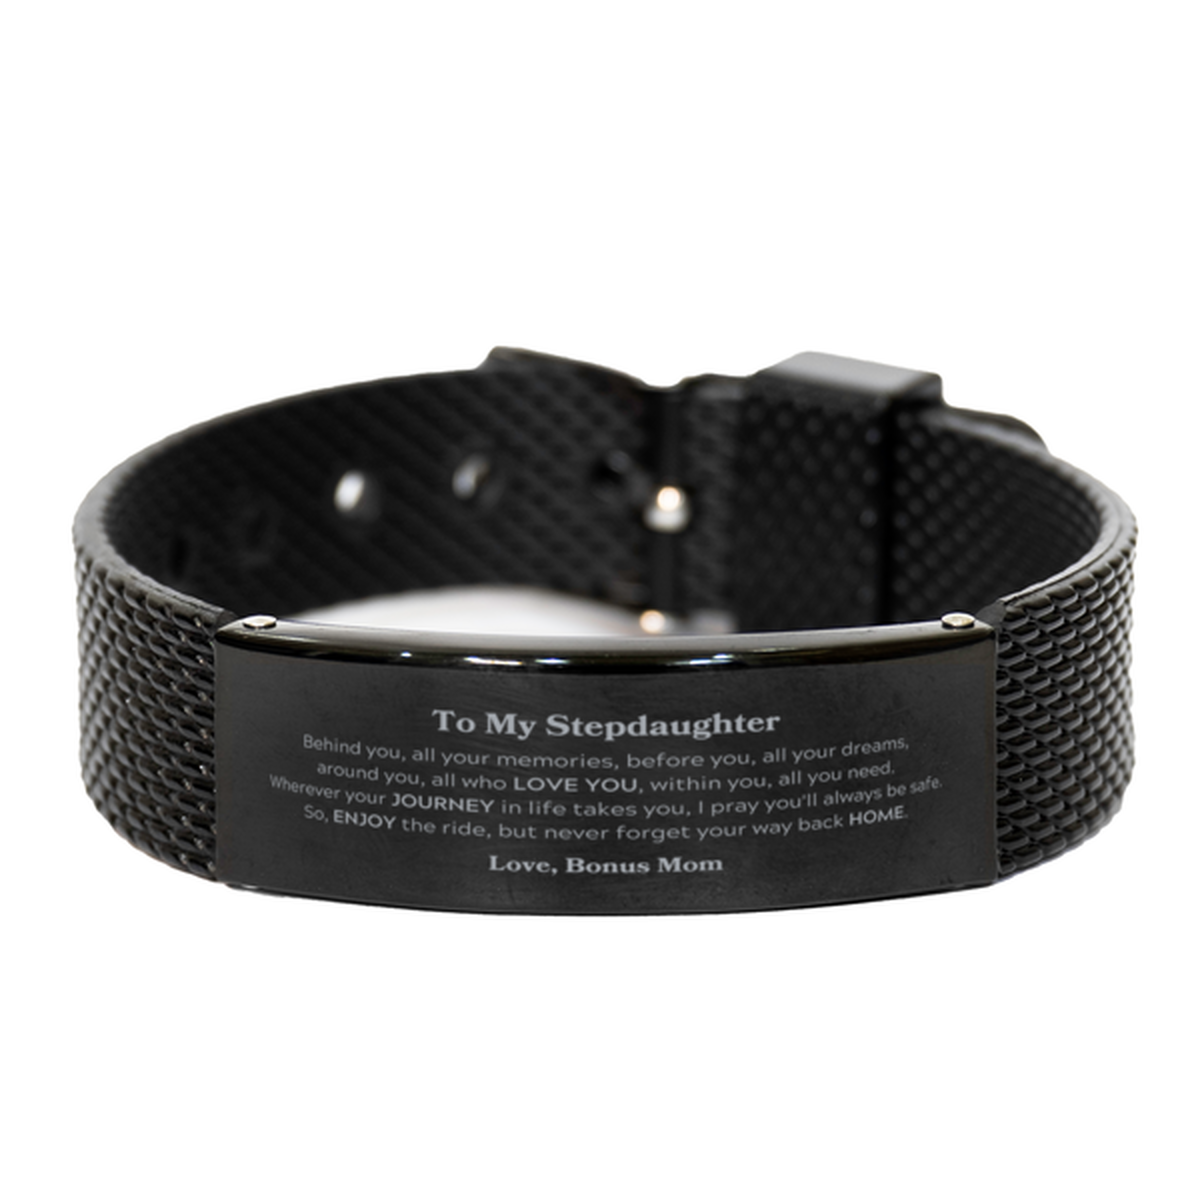 To My Stepdaughter Graduation Gifts from Bonus Mom, Stepdaughter Black Shark Mesh Bracelet Christmas Birthday Gifts for Stepdaughter Behind you, all your memories, before you, all your dreams. Love, Bonus Mom